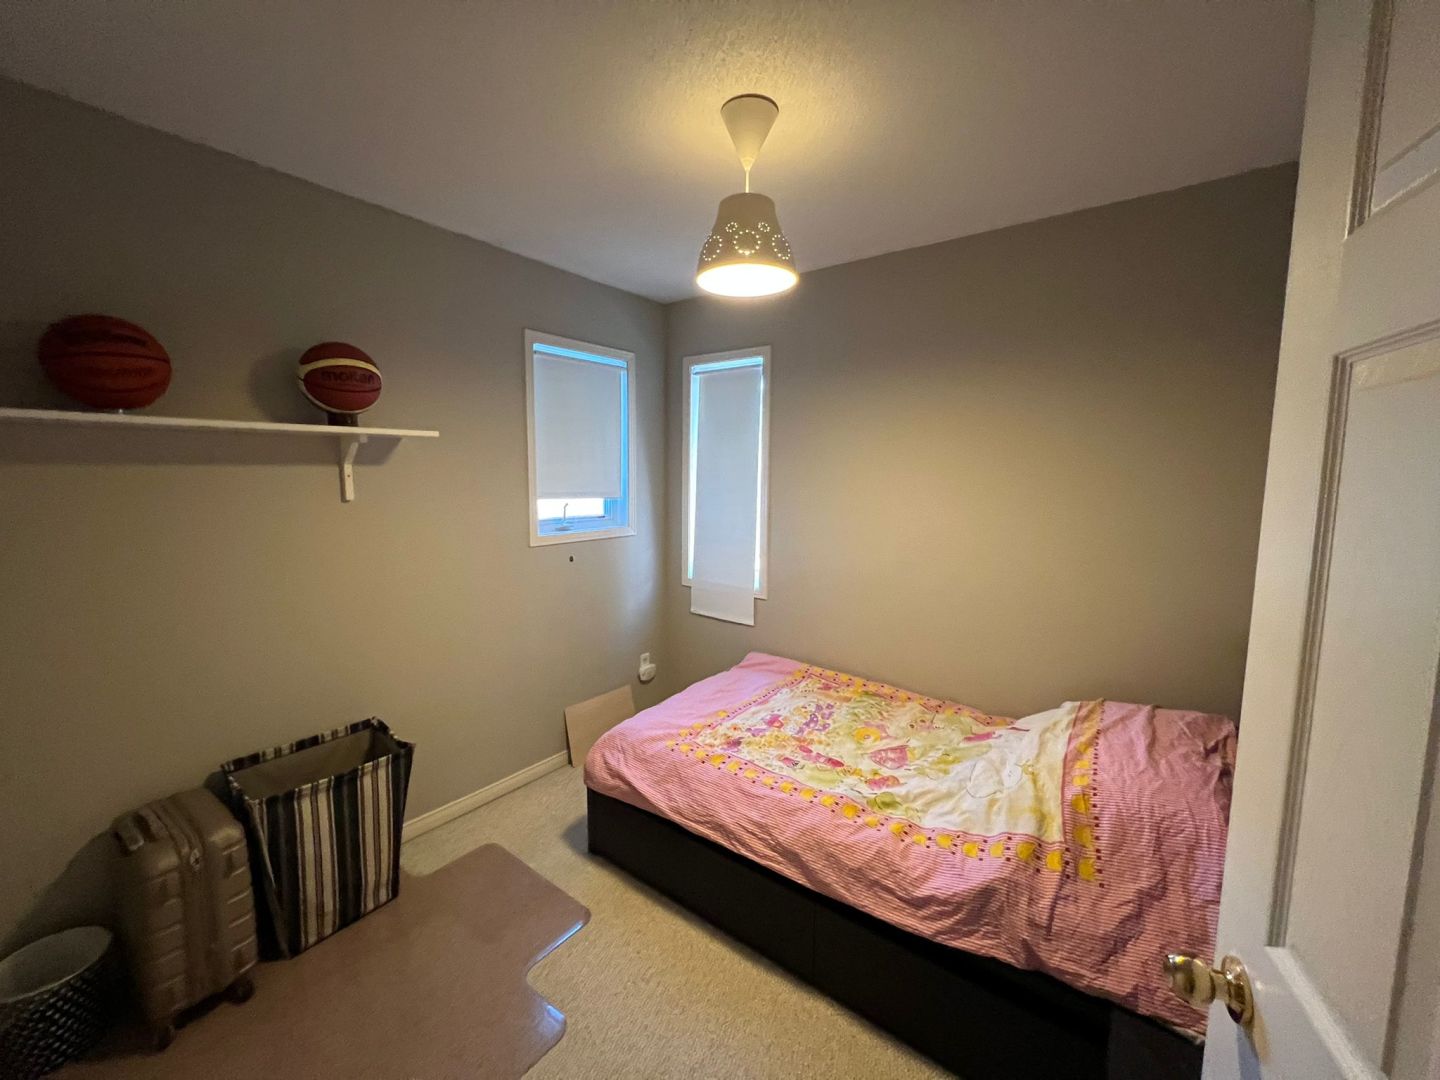 Premium Homestay Room - Torbarrie Rd, North York room for rent 54